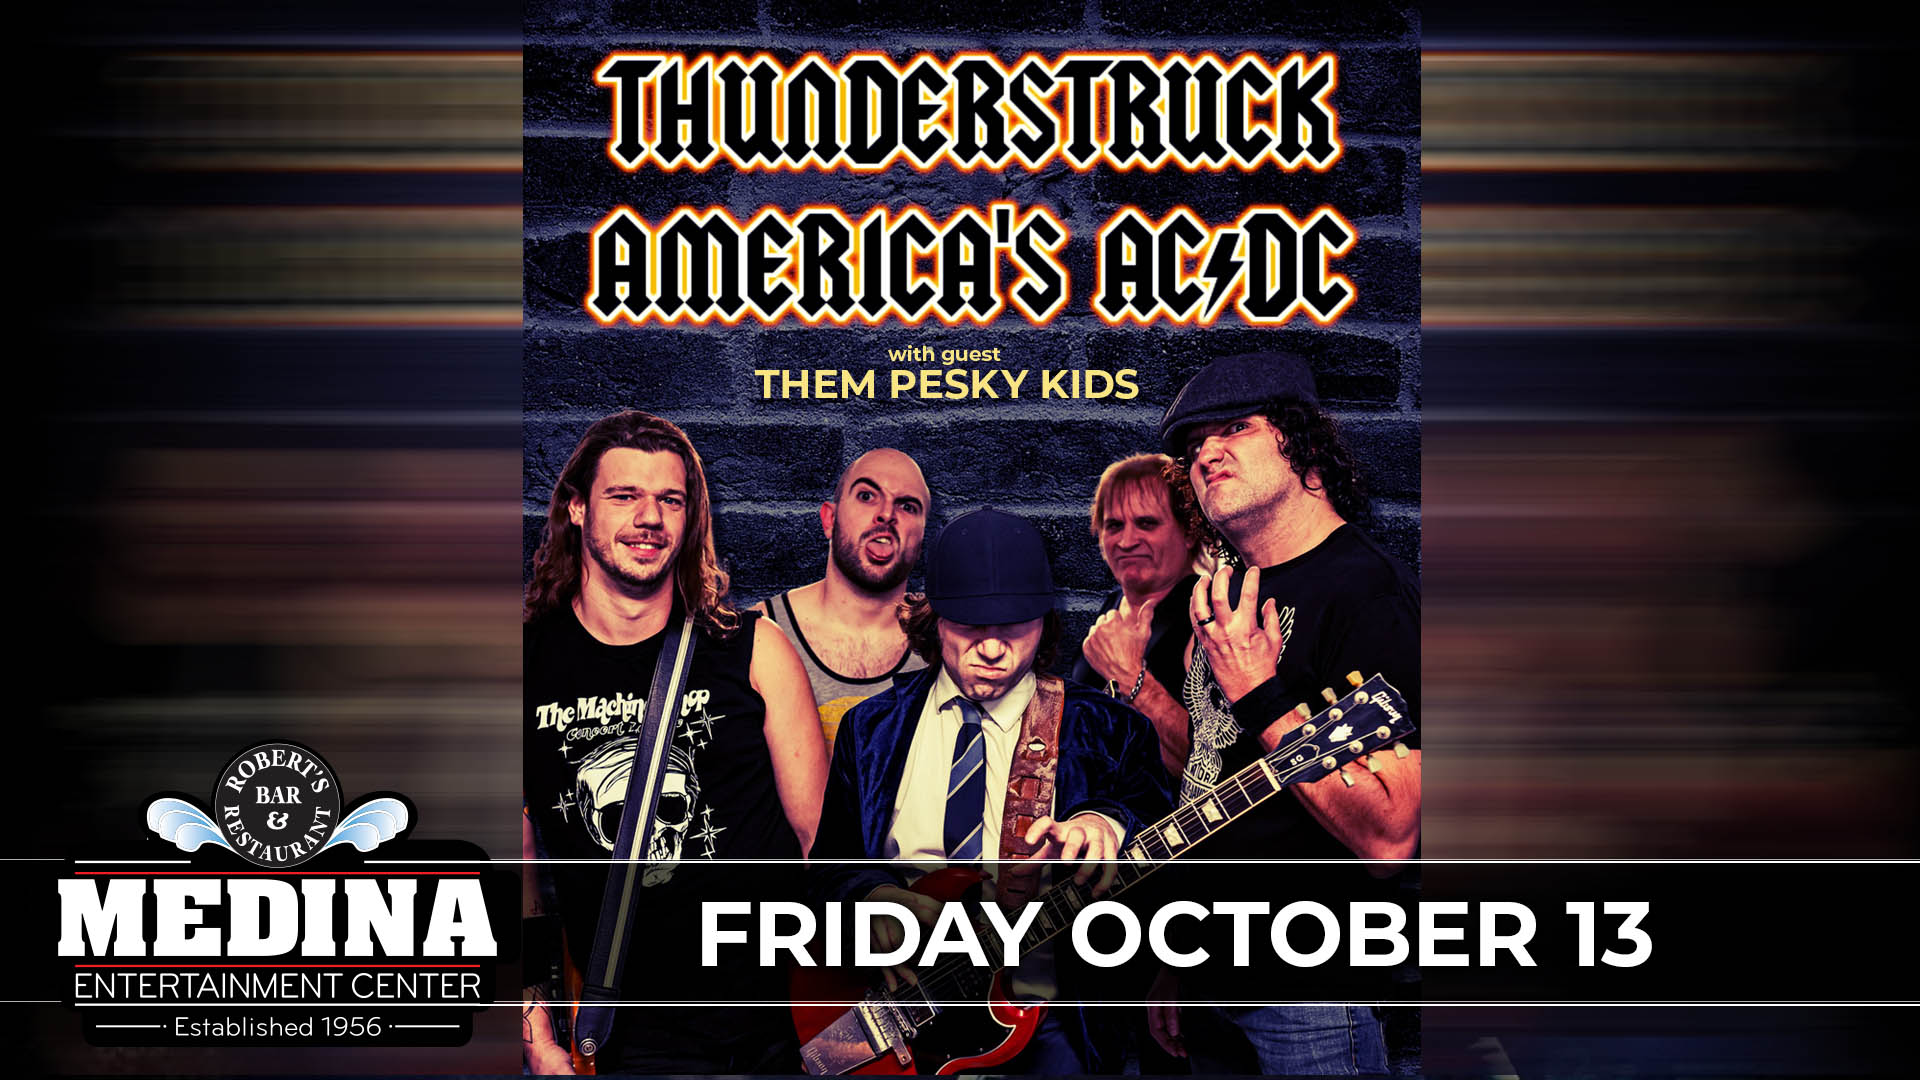 THUNDERSTRUCK Americas AC/DC Tribute with guest Them Pesky Kids Medina Entertainment Center Friday, October 13th, 2023 Doors: 7:30PM | Music: 8:00PM | 21+ Tickets on-sale Friday, June 2nd at 11AM General Admission $20.00 (Advance) / $25.00 (Day of Show) plus applicable fees